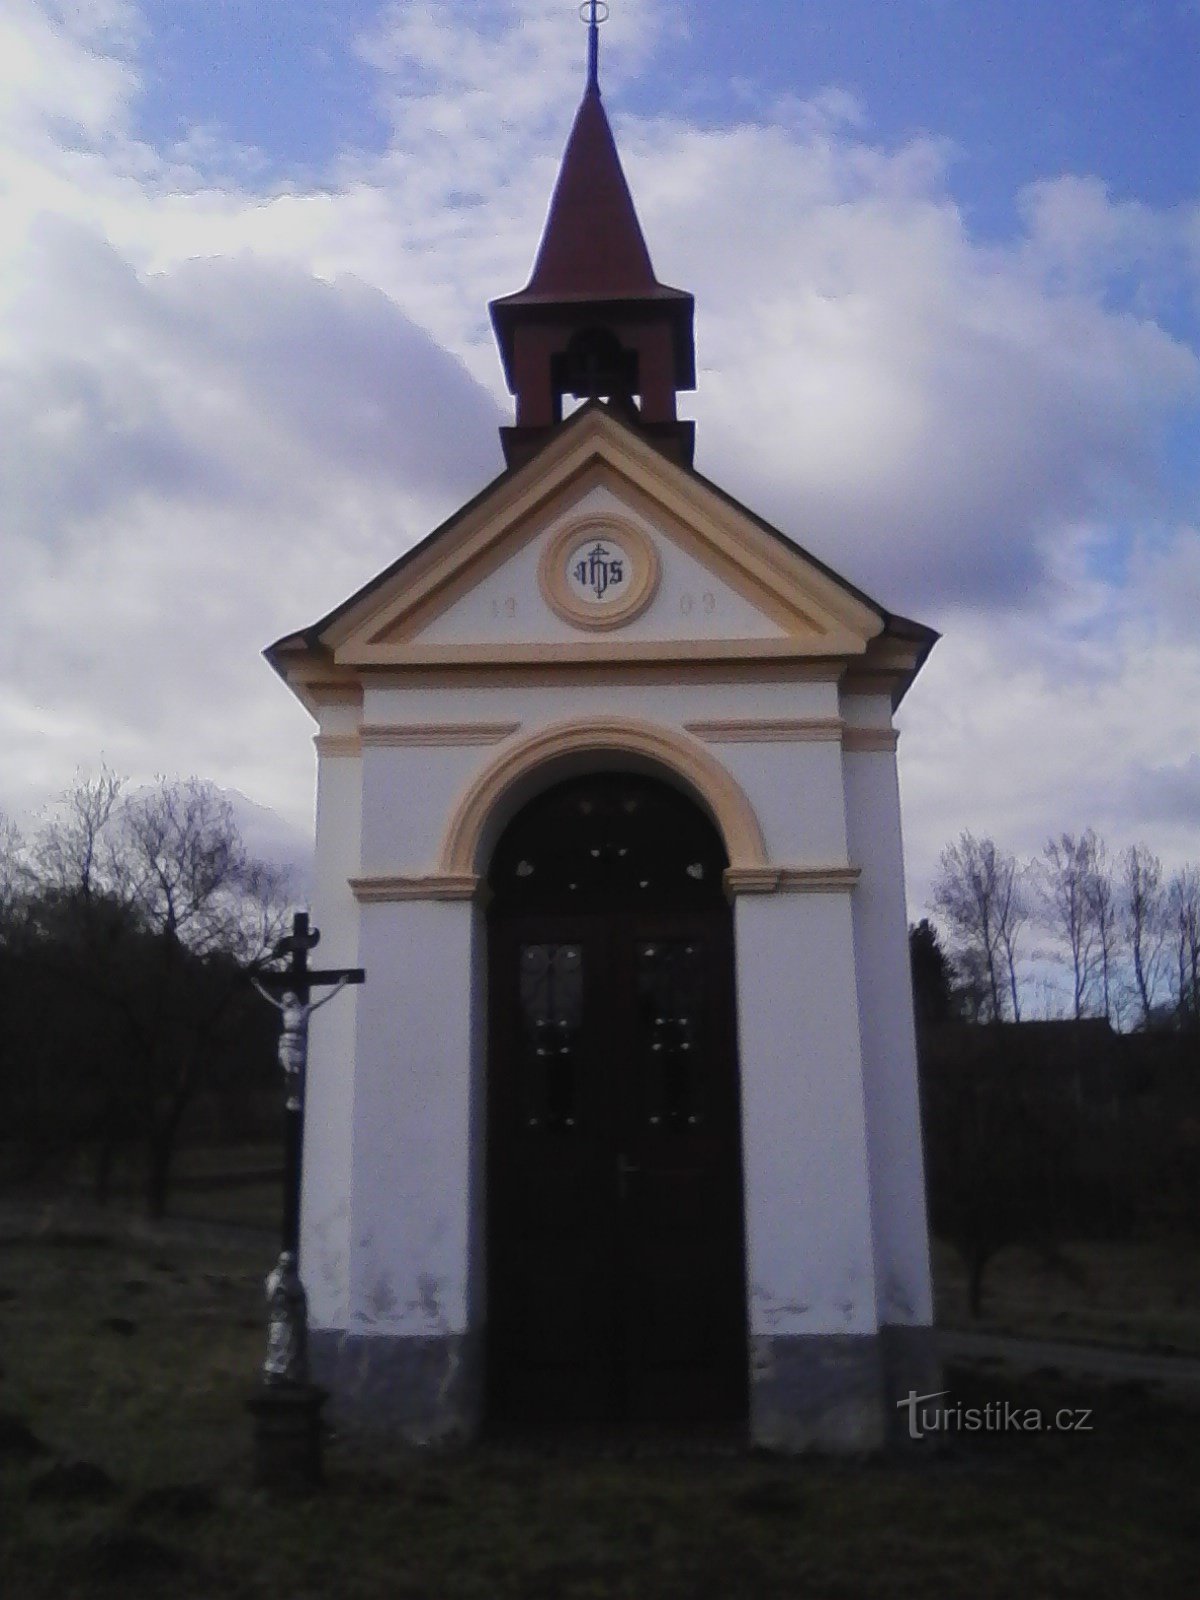 2. chapel with a cast iron cross in Nesvačile.